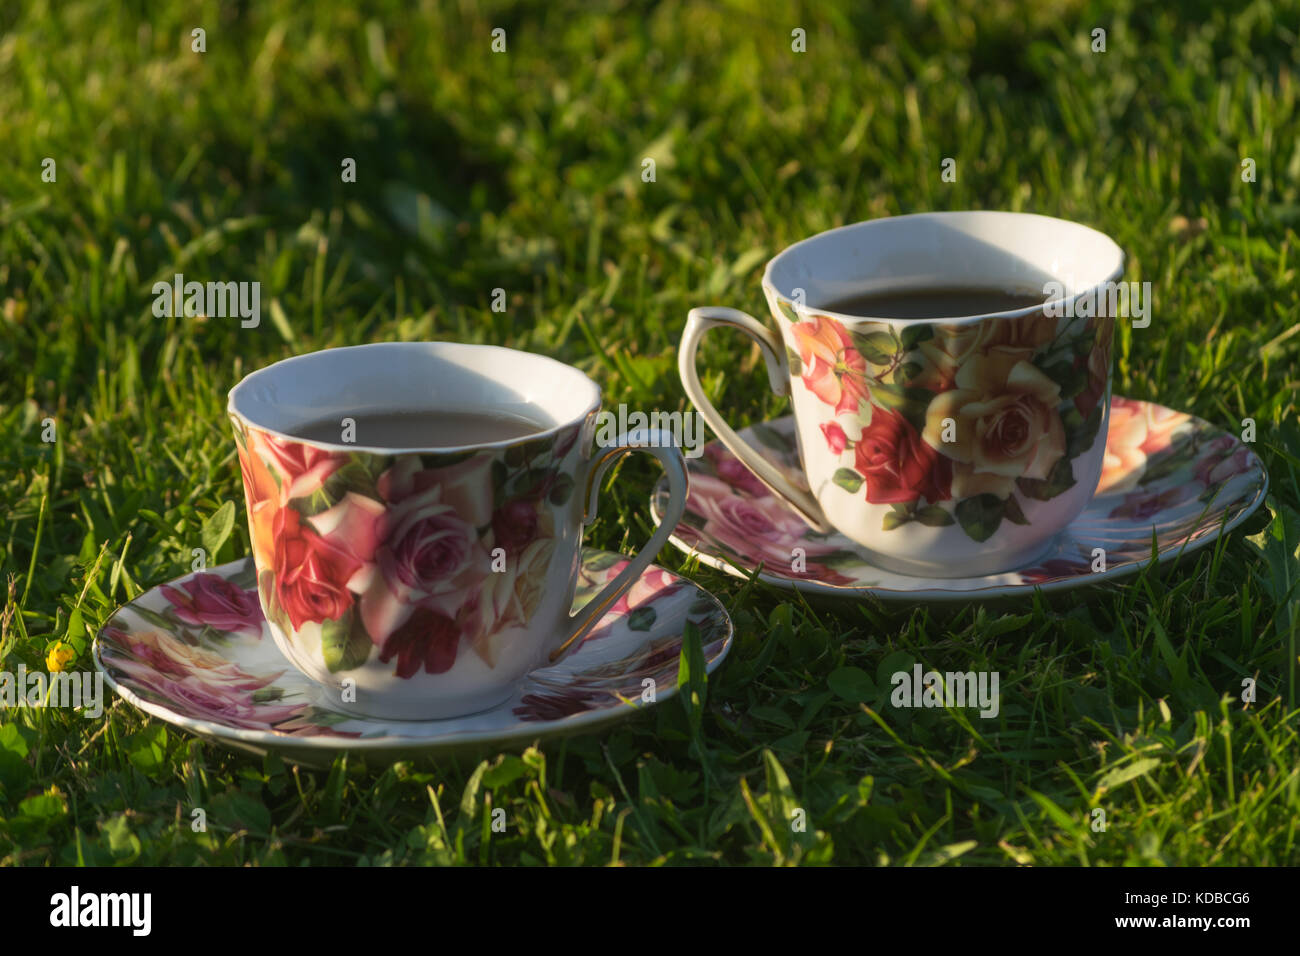 Coffee on the grass, Stock Photo